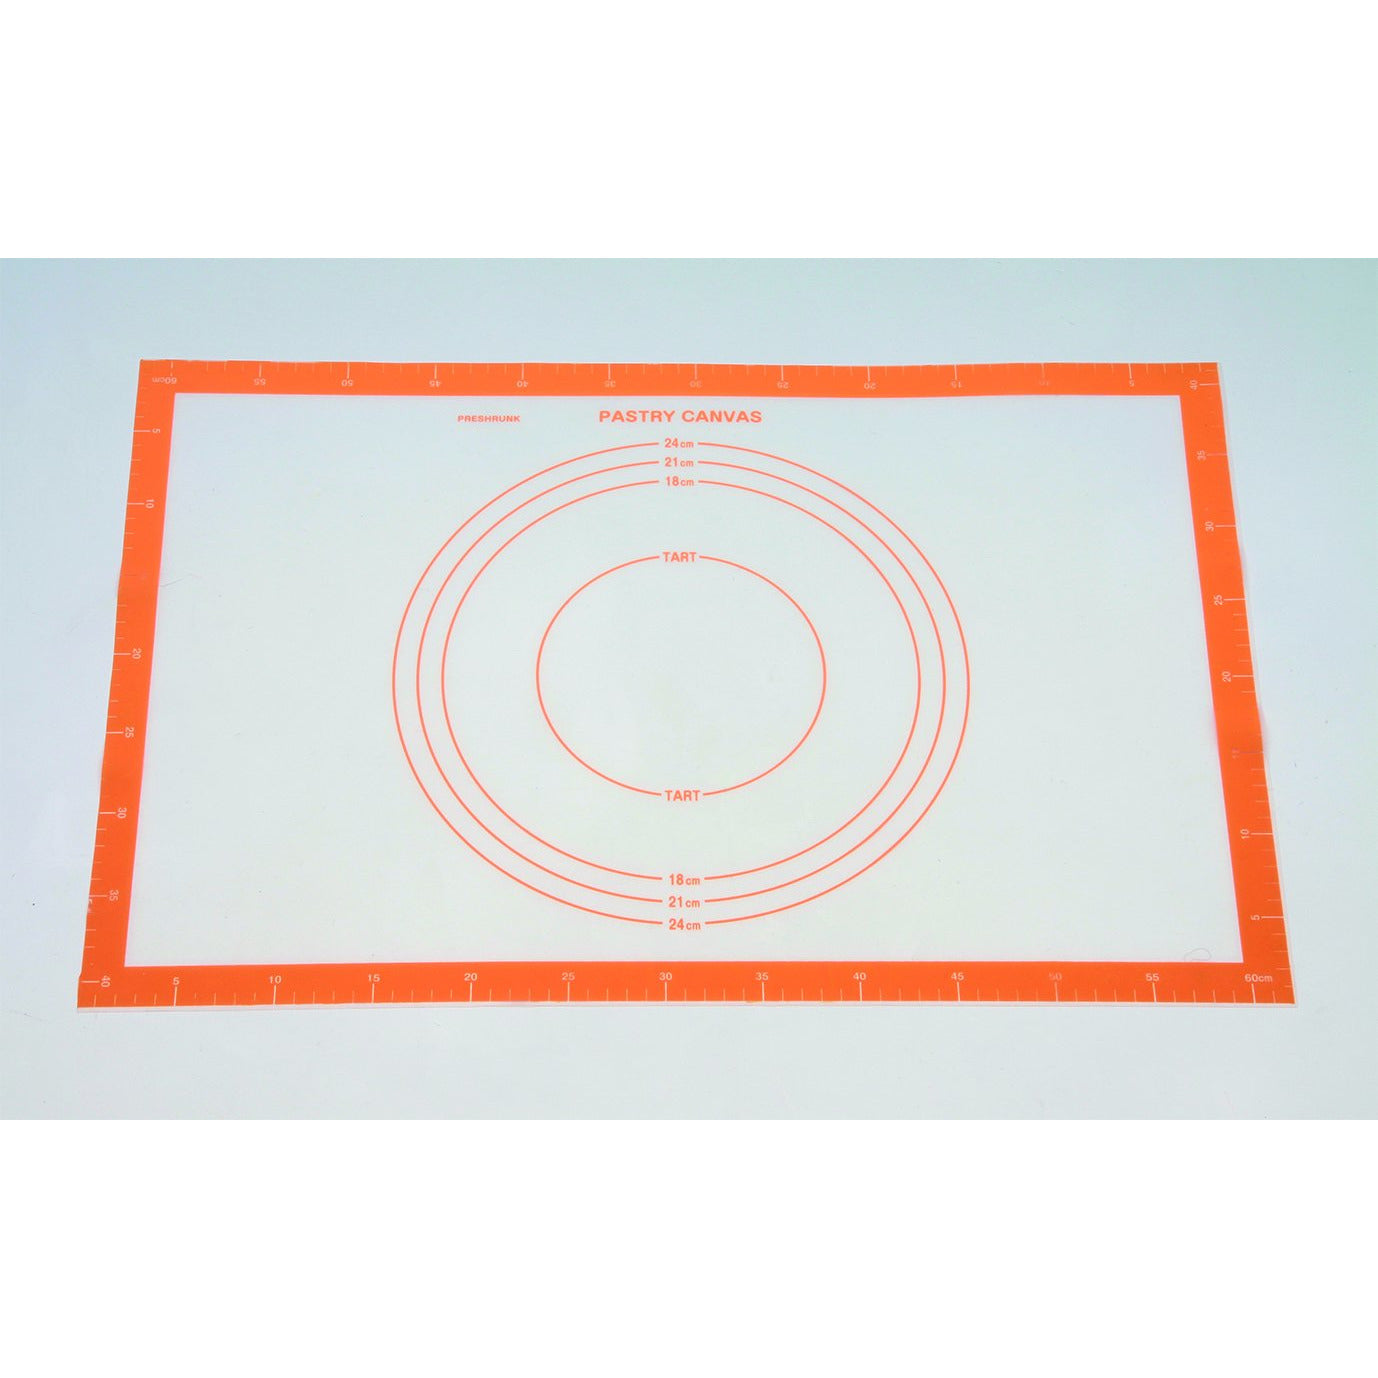 TigerCrown Silicone Mat 46*60cm